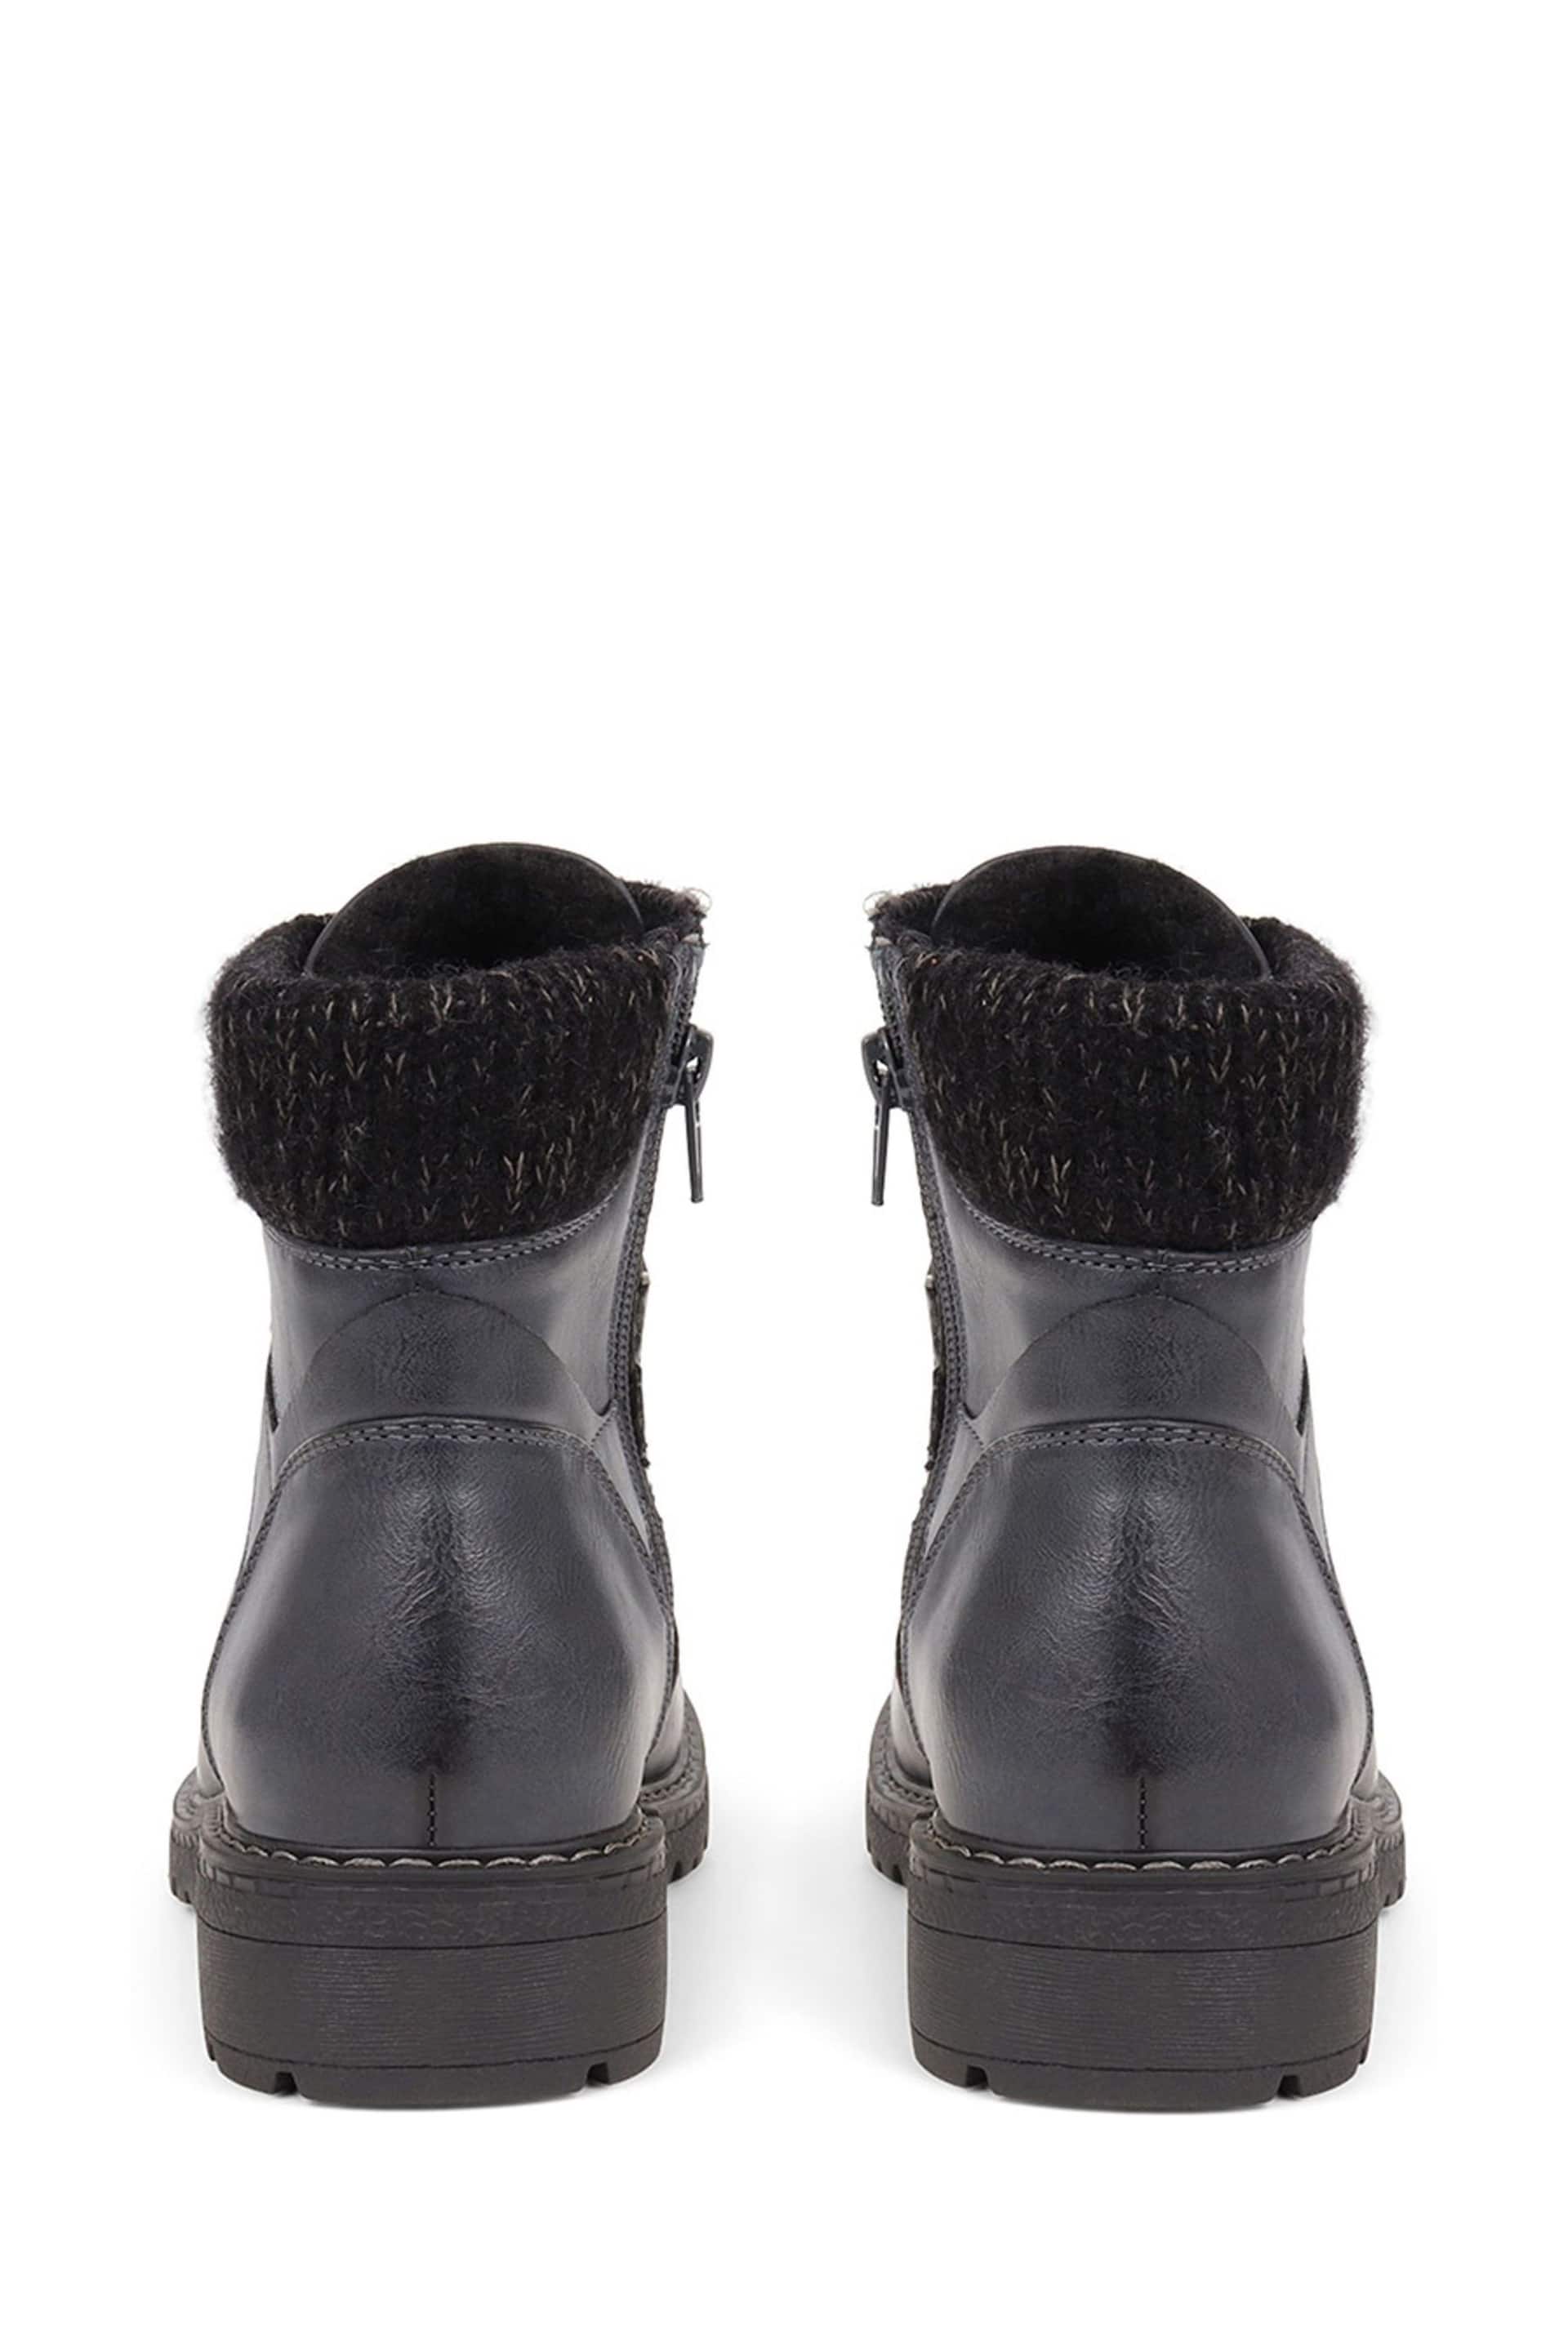 Pavers Lace Up Ankle Boots - Image 3 of 5